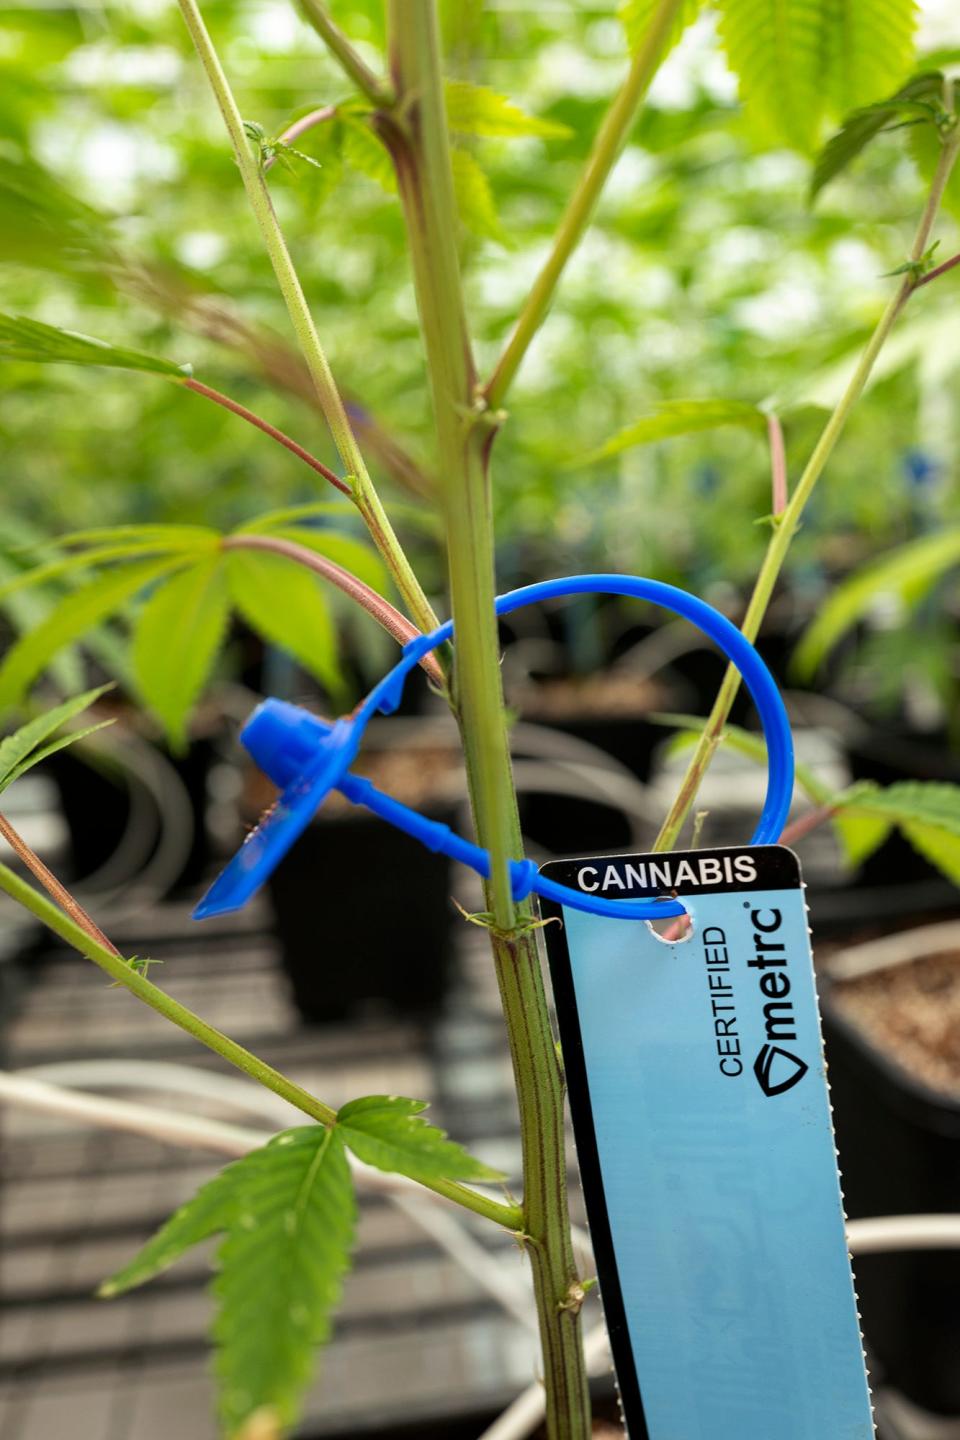 Metrc radio-frequency identification tags like this will be required for all marijuana plants grown by licensed businesses in Oklahoma. The tags help regulators and businesses track inventory.